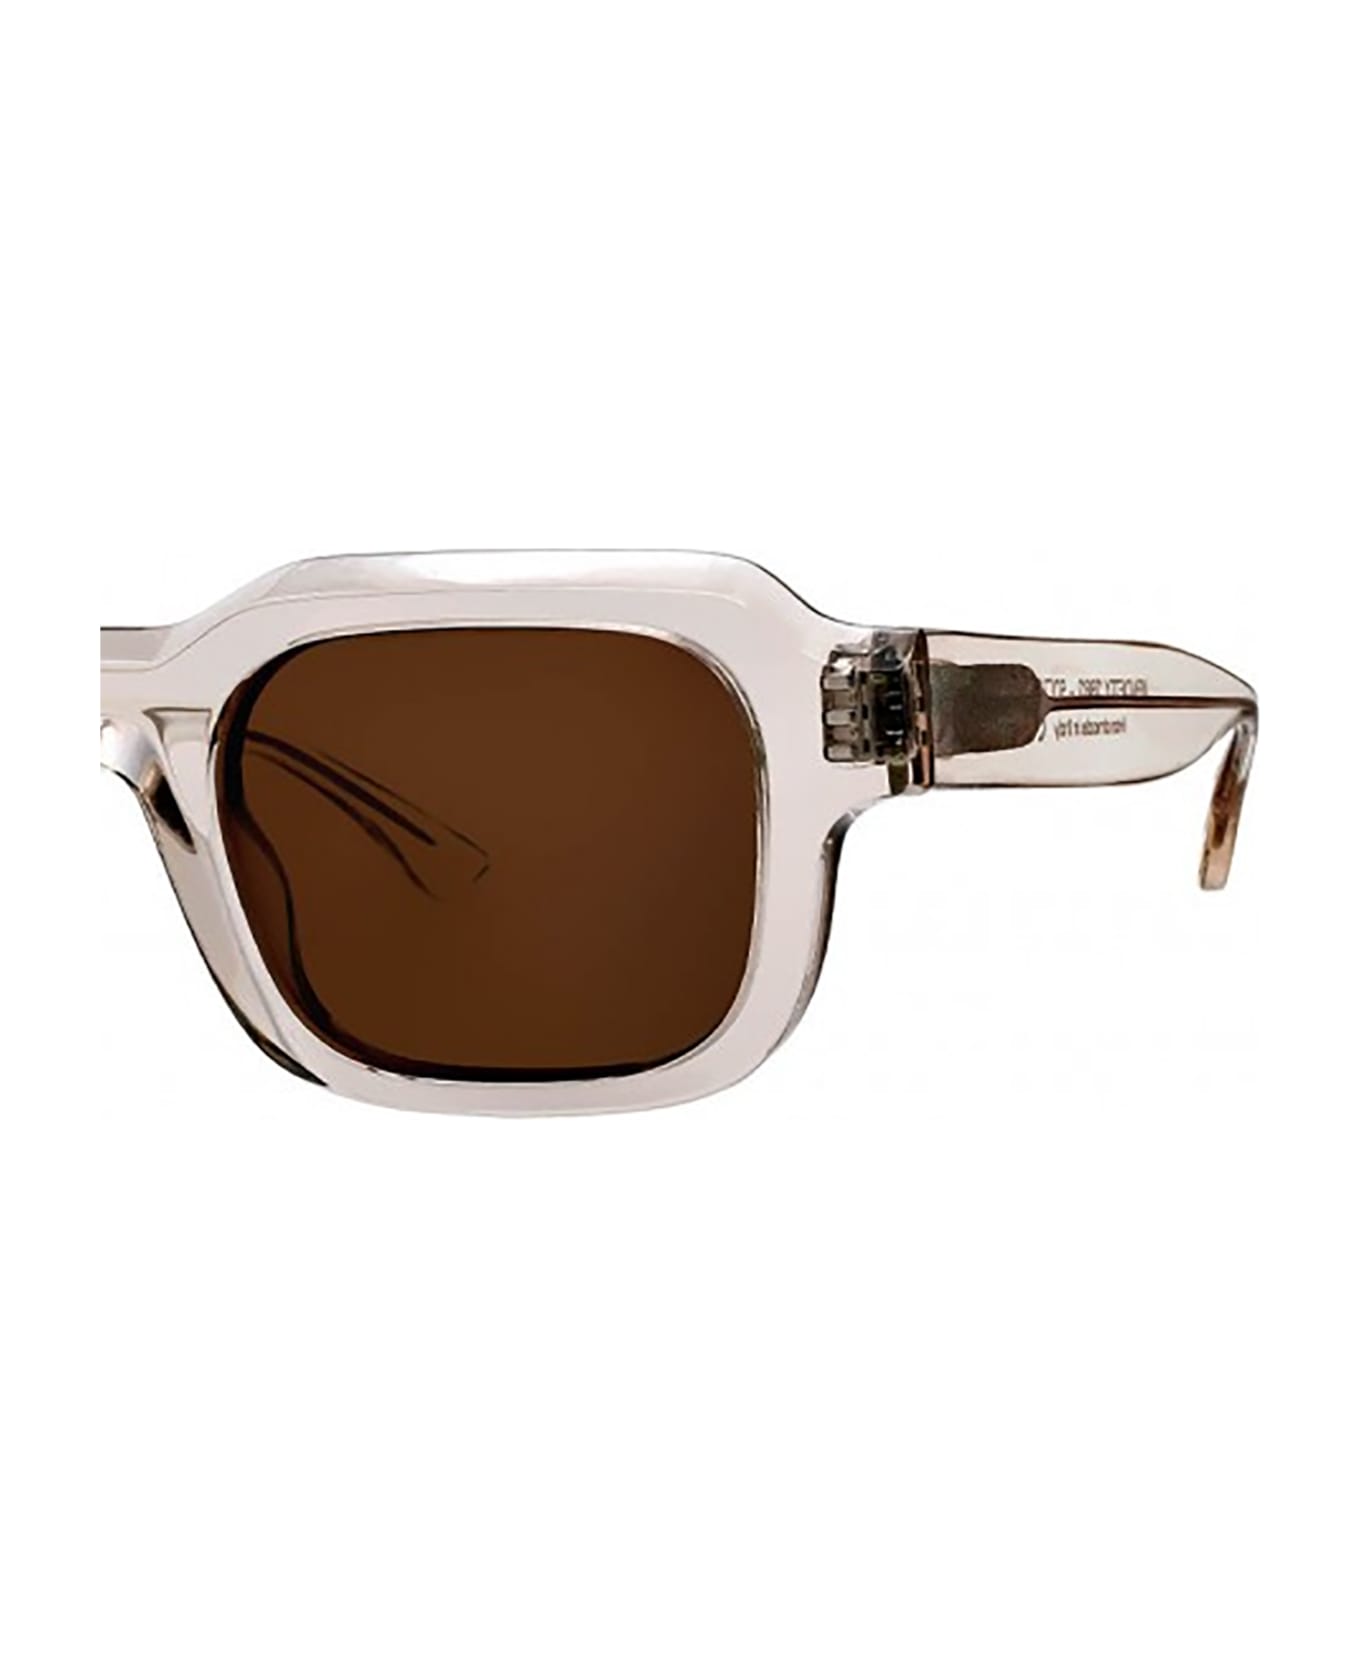 Thierry Lasry VENDETTY Sunglasses